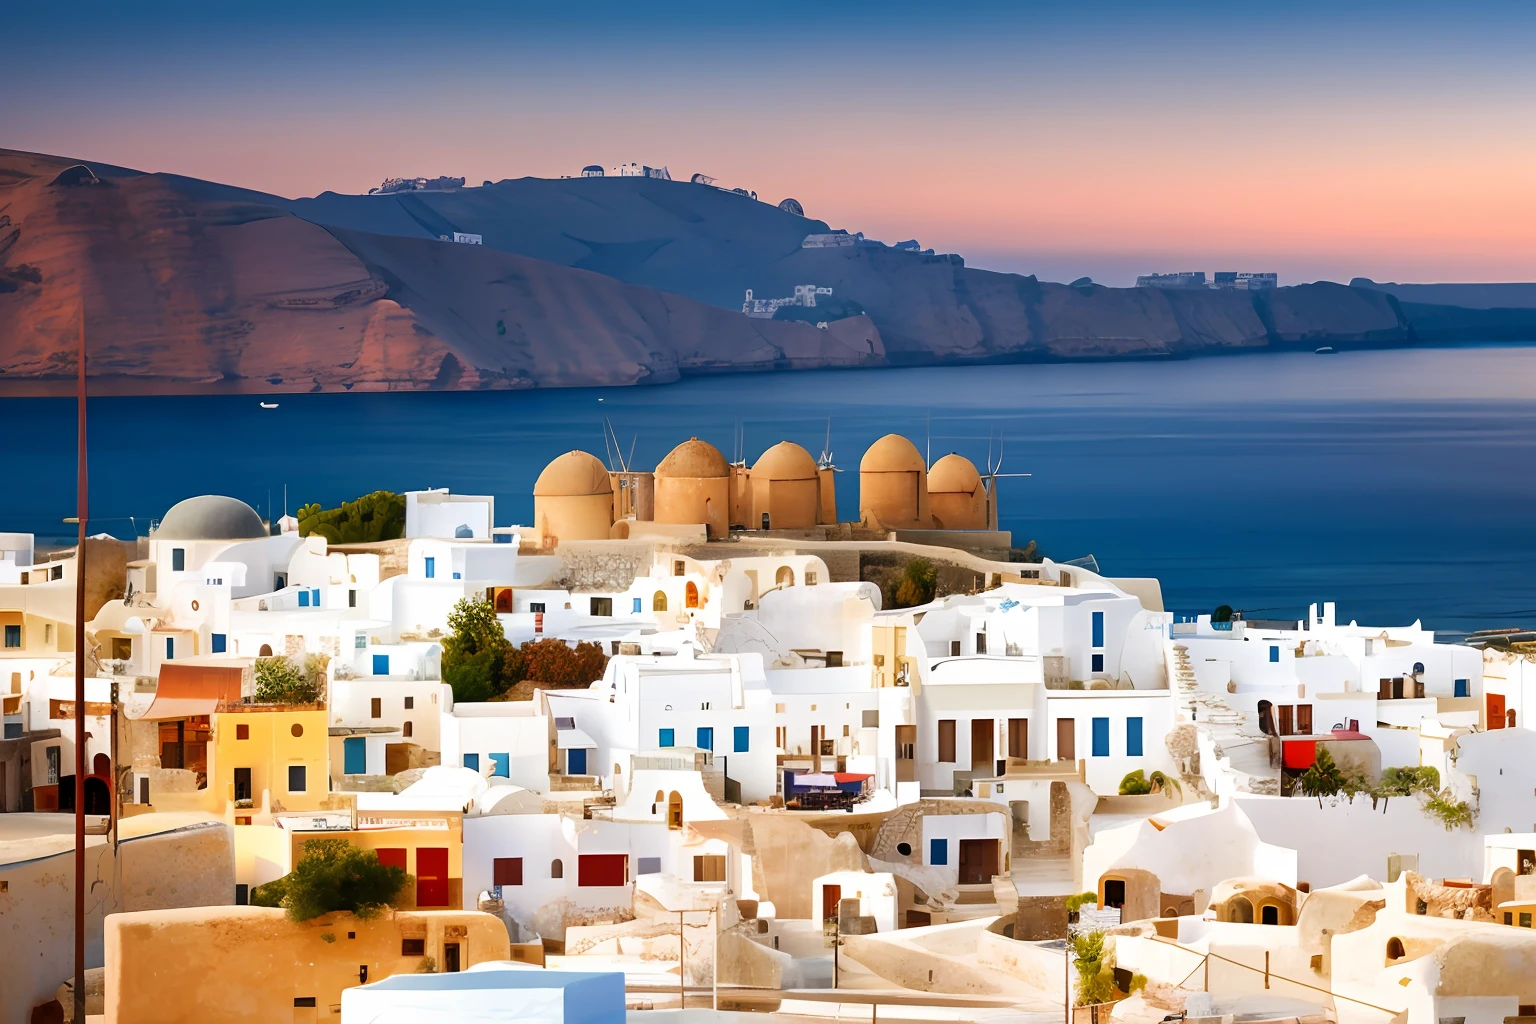 Alafed view of town with water body in background, whitewashed buildings, Greece, white buildings with red roofs, Round building on background, surrounding the city, Fantasy panorama of Greece, White houses, greek setting, Santorini, Mills, mediterranean island scenery, white building, Town in the background, Cycladic sculpture style